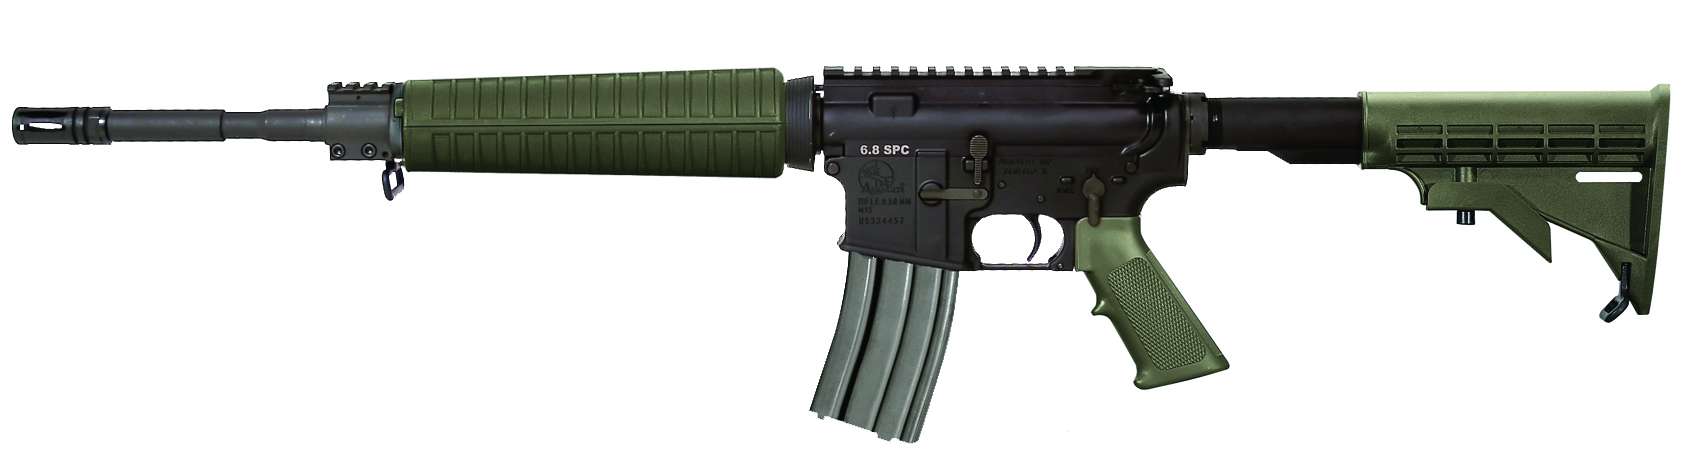 Armalite 6.8mm Carbine Now Available